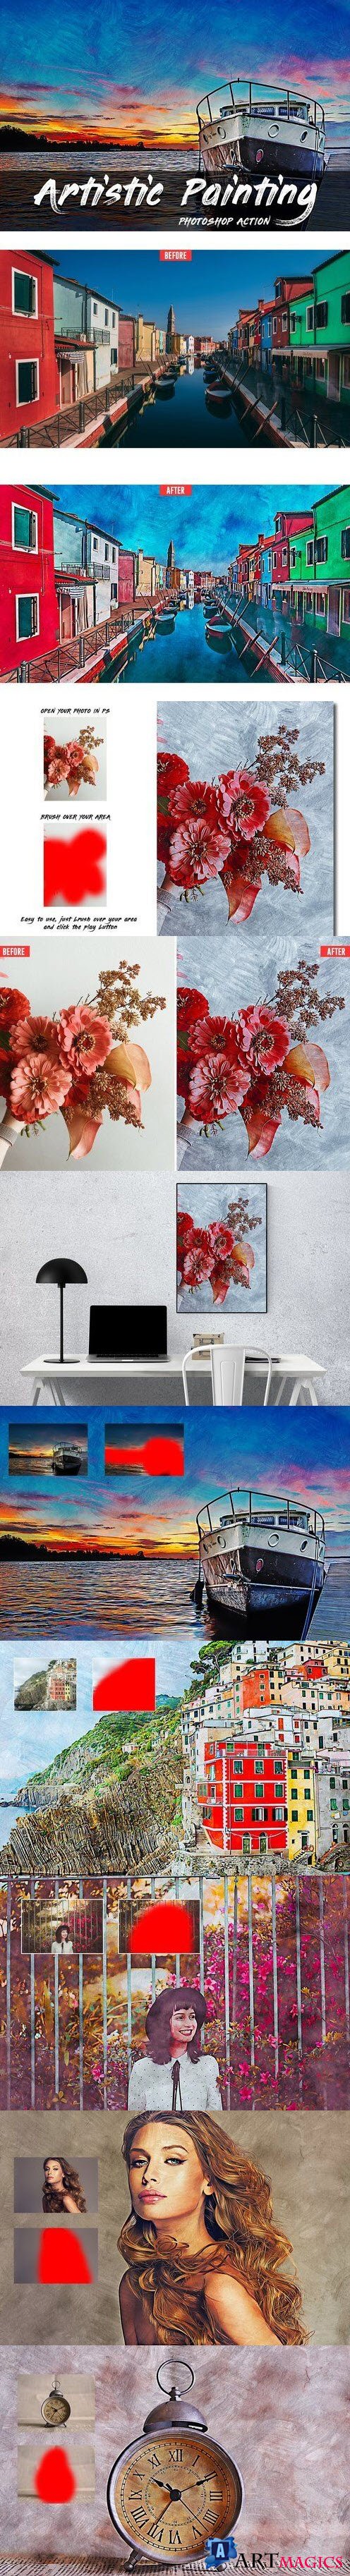 Artistic Painting Photoshop Action 4318557